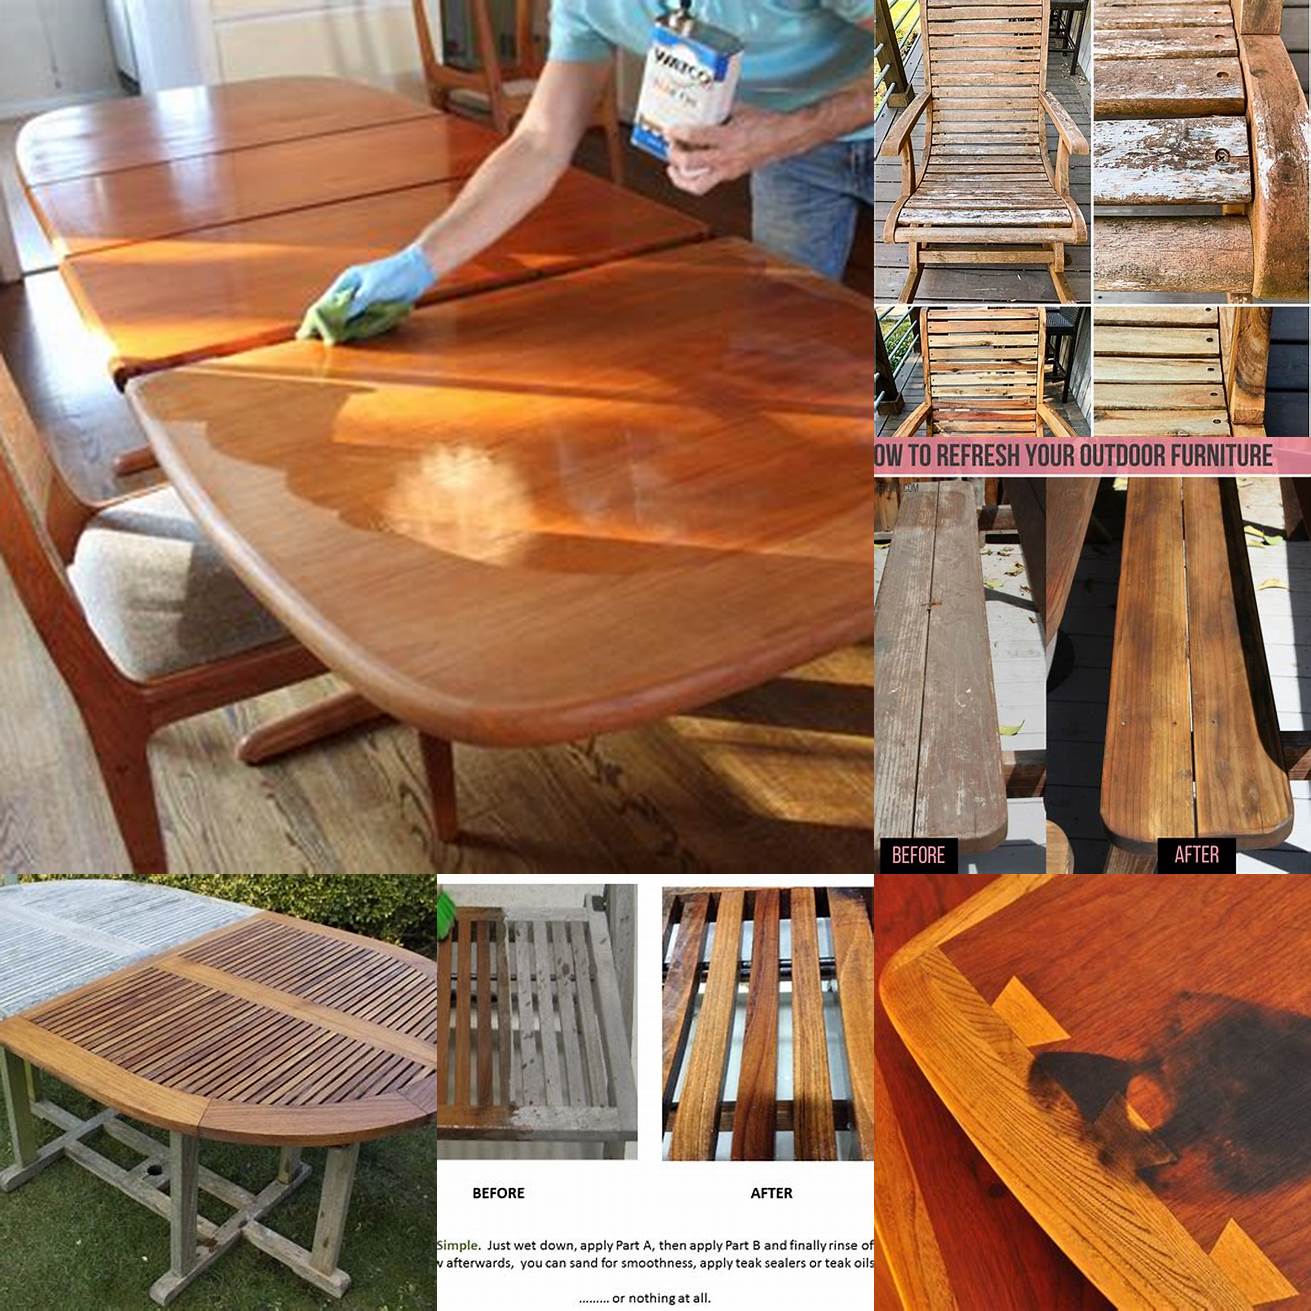 A before and after of teak furniture that has been oiled